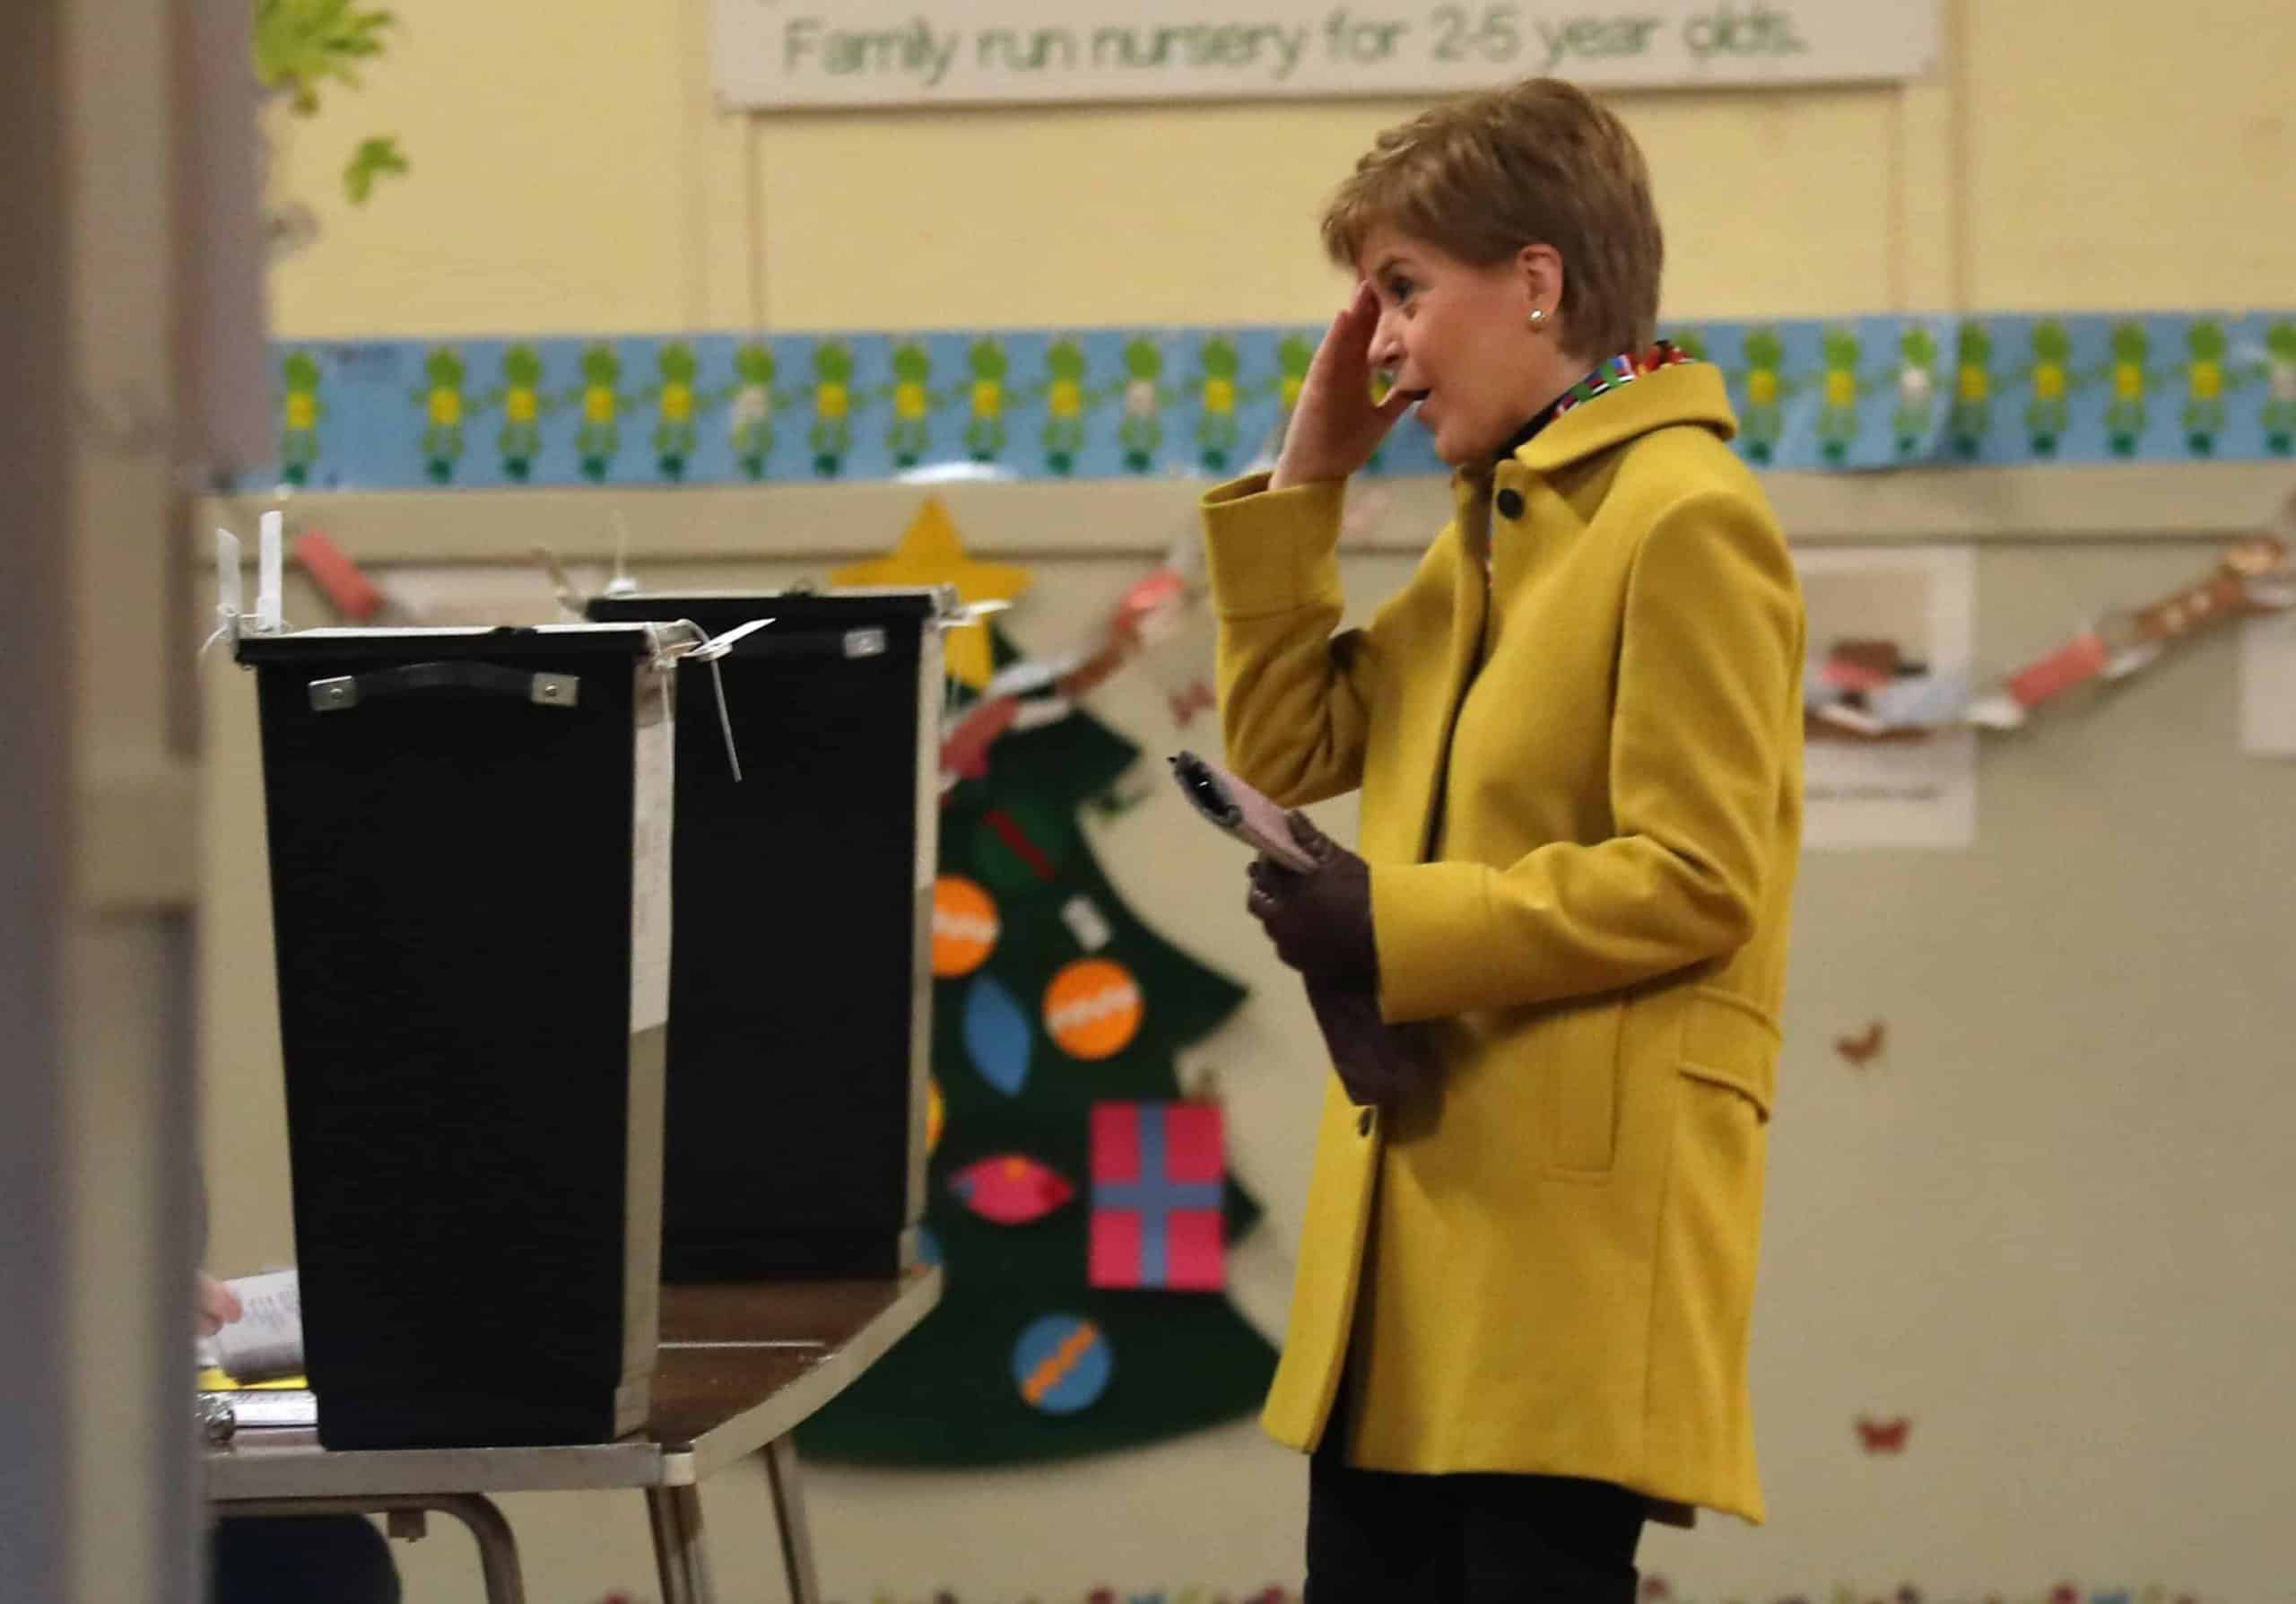 Exit polls suggest good night for SNP – but Sturgeon says UK forecast ‘grim’